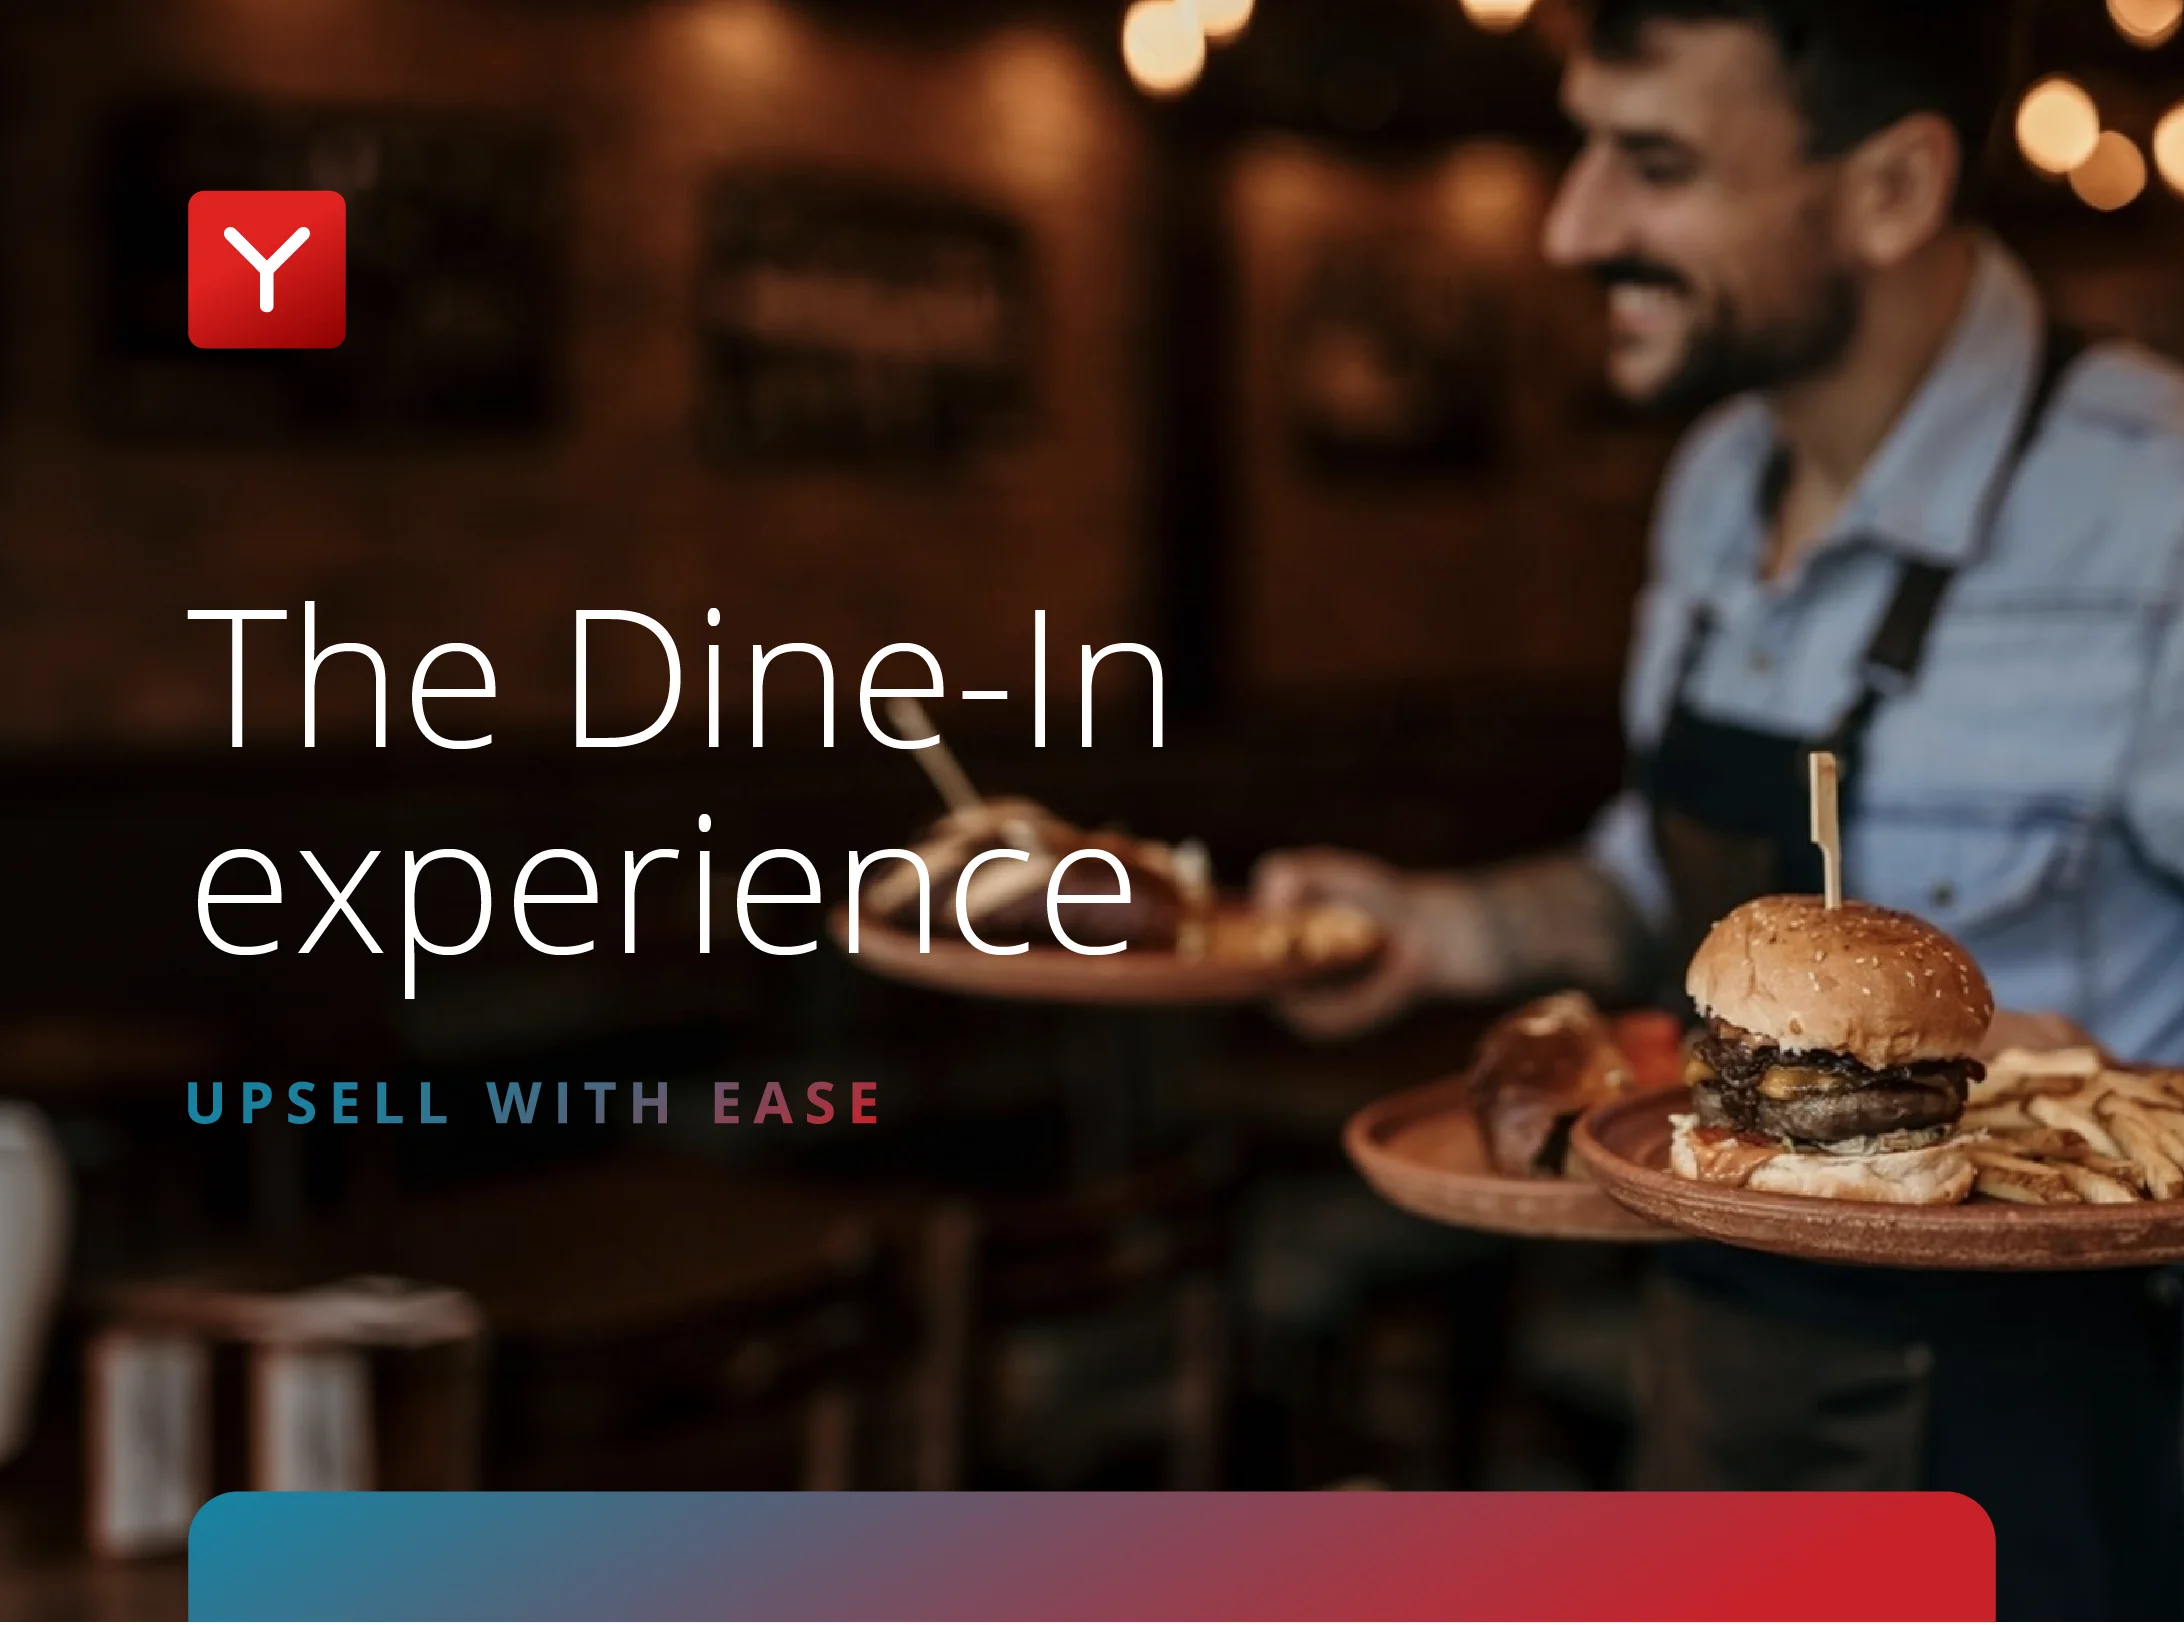 The Dine-In experience – upsell with ease